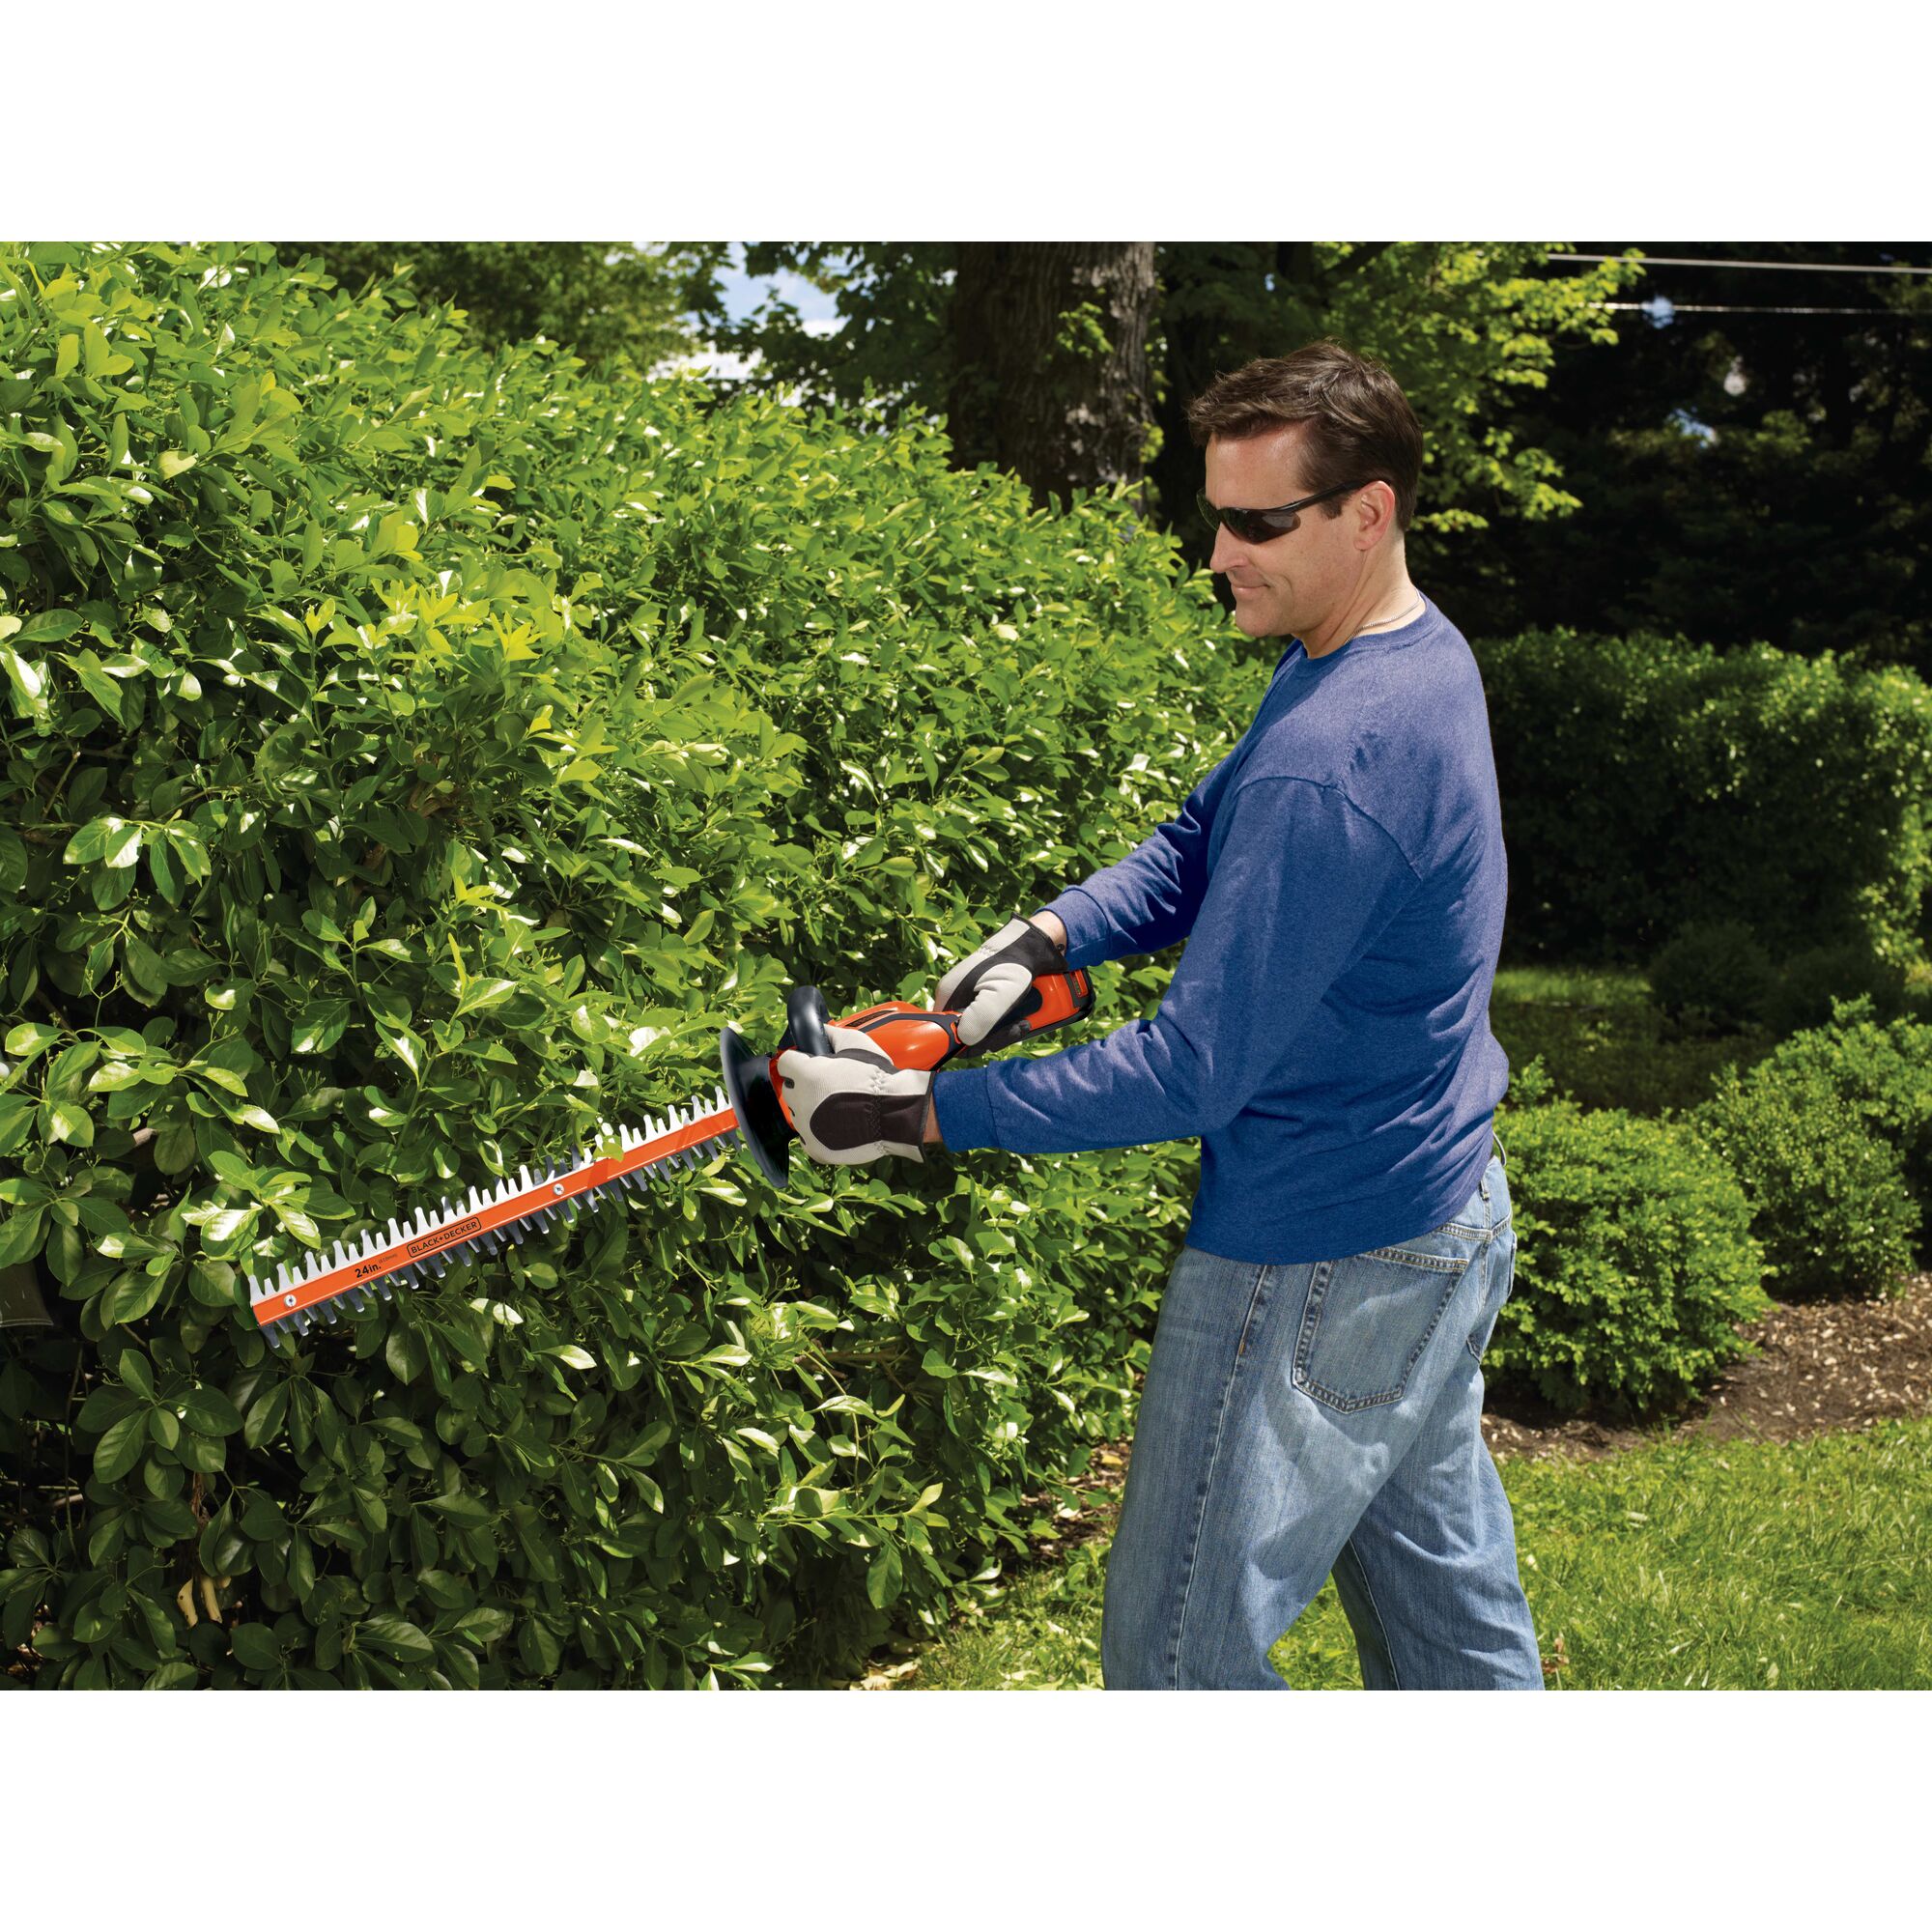 Lithium 24 inch Hedge Trimmer being used by person to trim bushes.